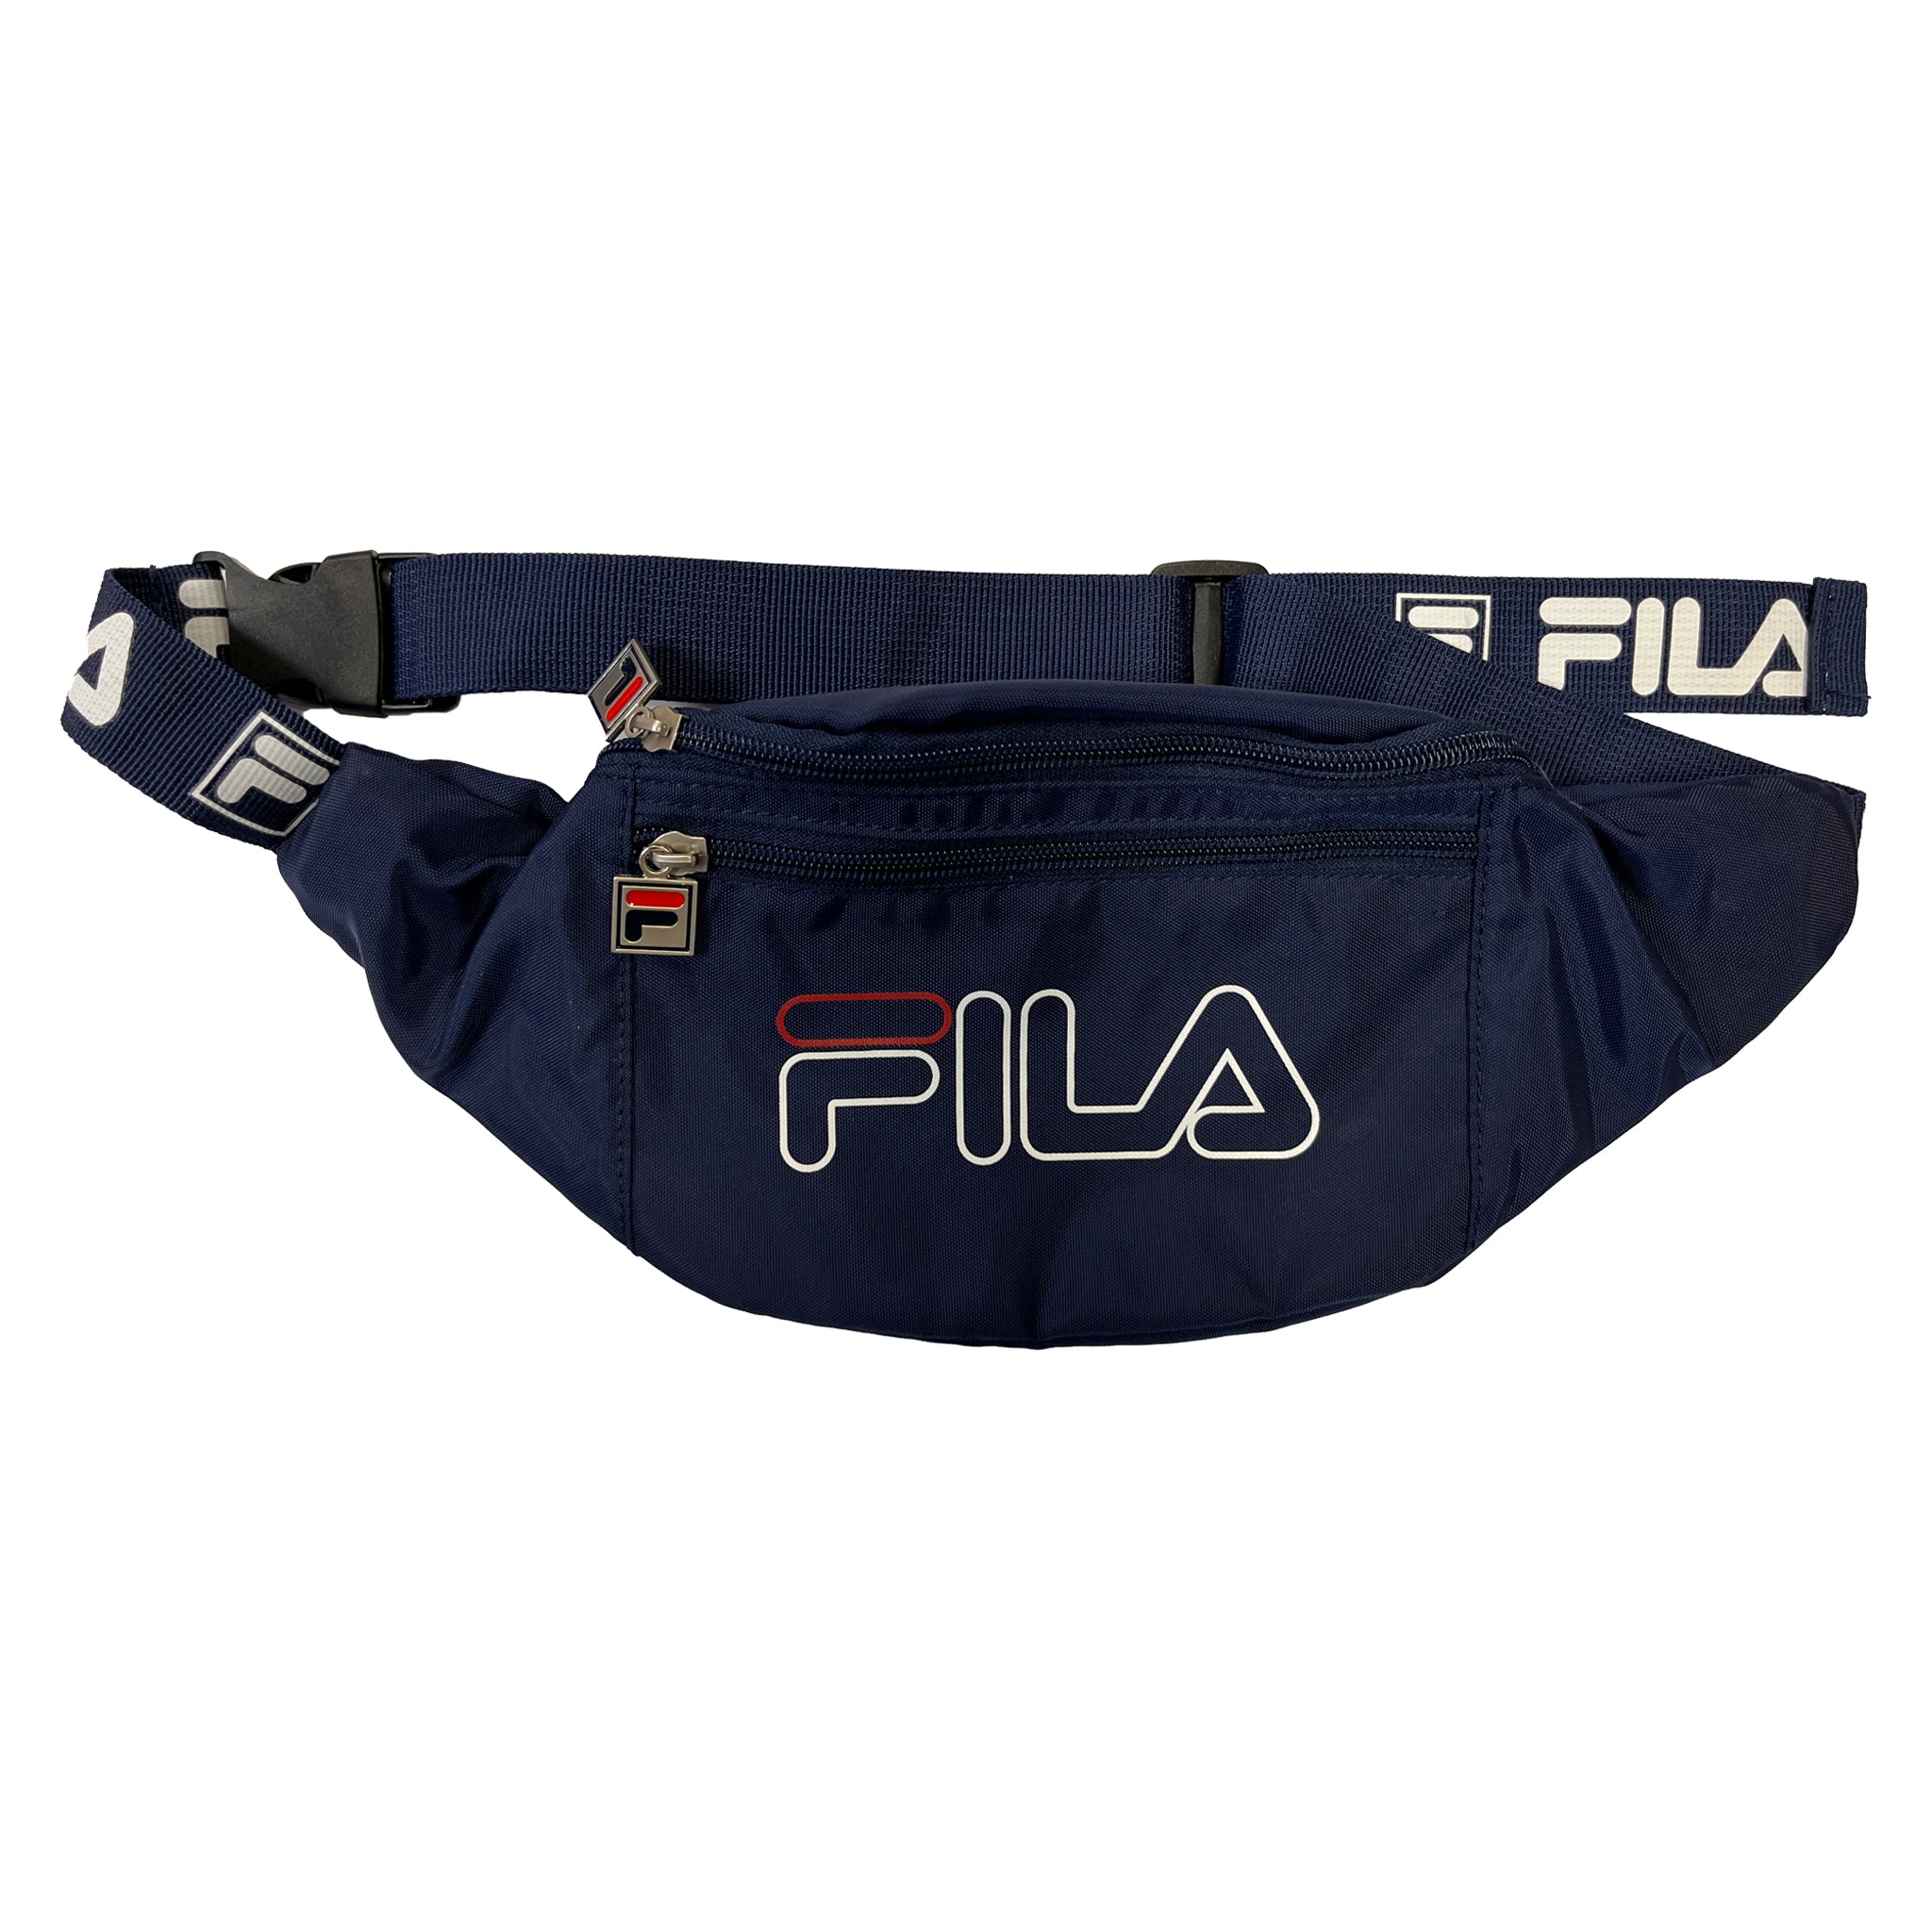 Practicality & Style: Our Bags & Backpacks for Men | FILA Europe